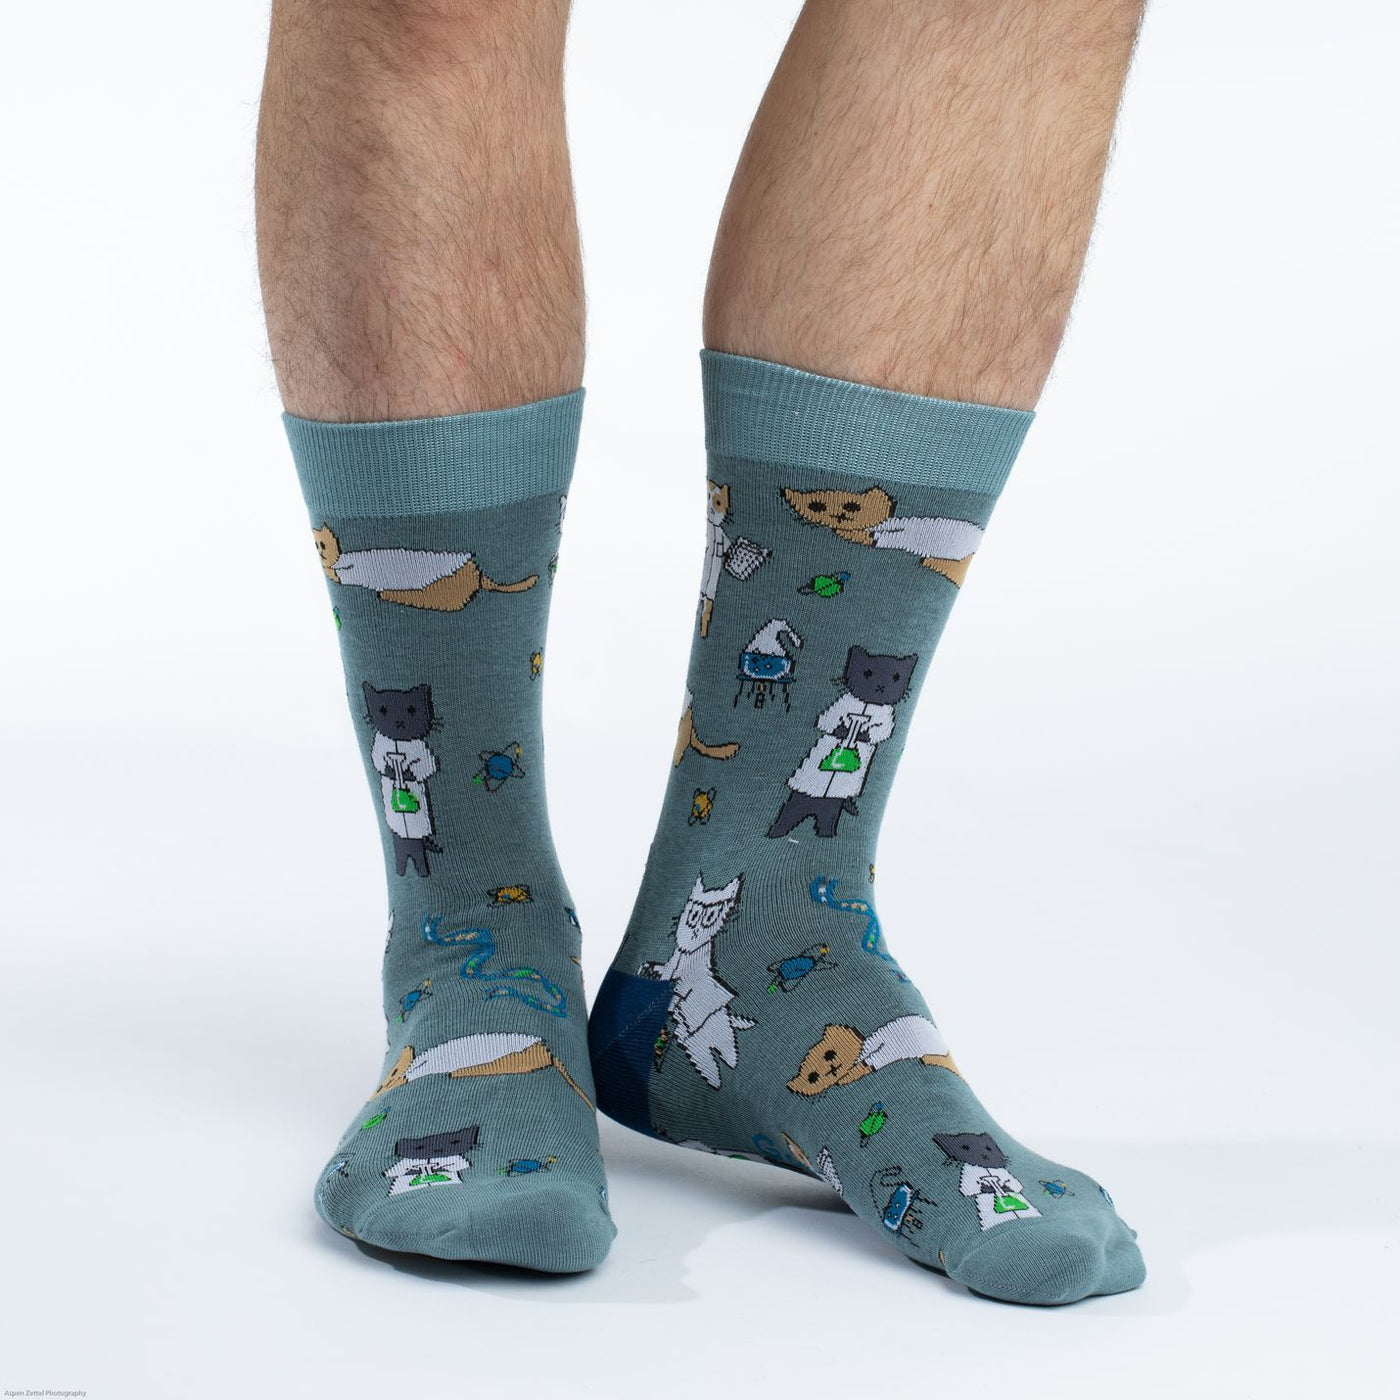 "Science Cats" Cotton Crew Socks by Good Luck Sock